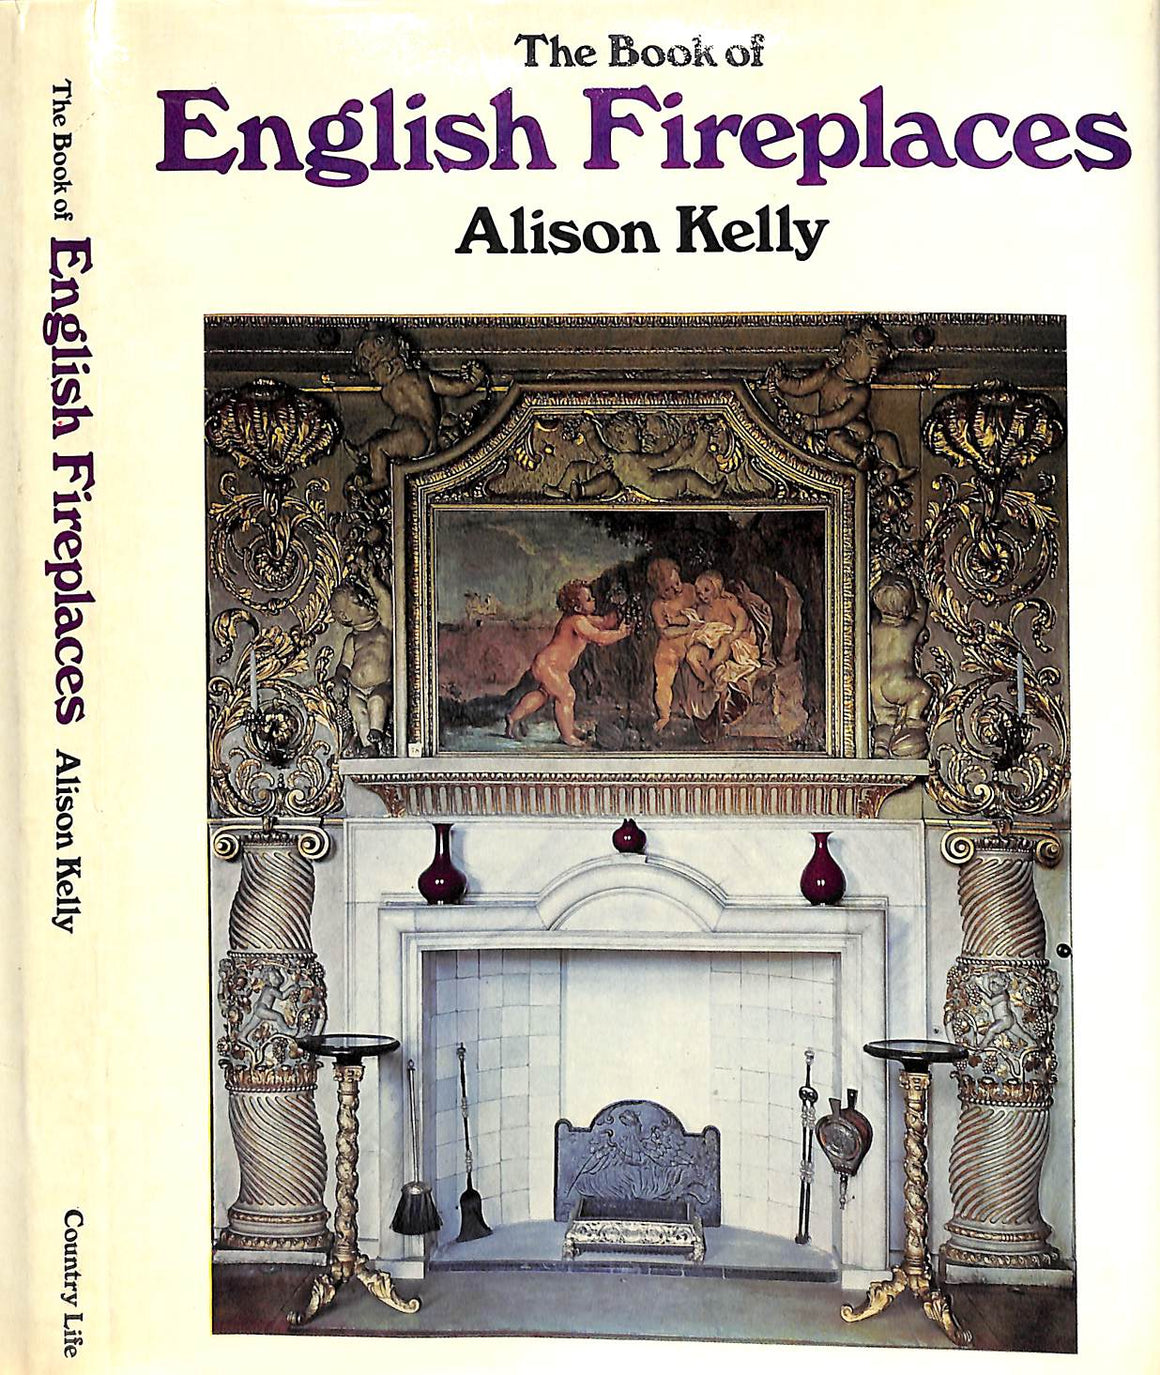 "The Book Of English Fireplaces" 1968 KELLY, Alison